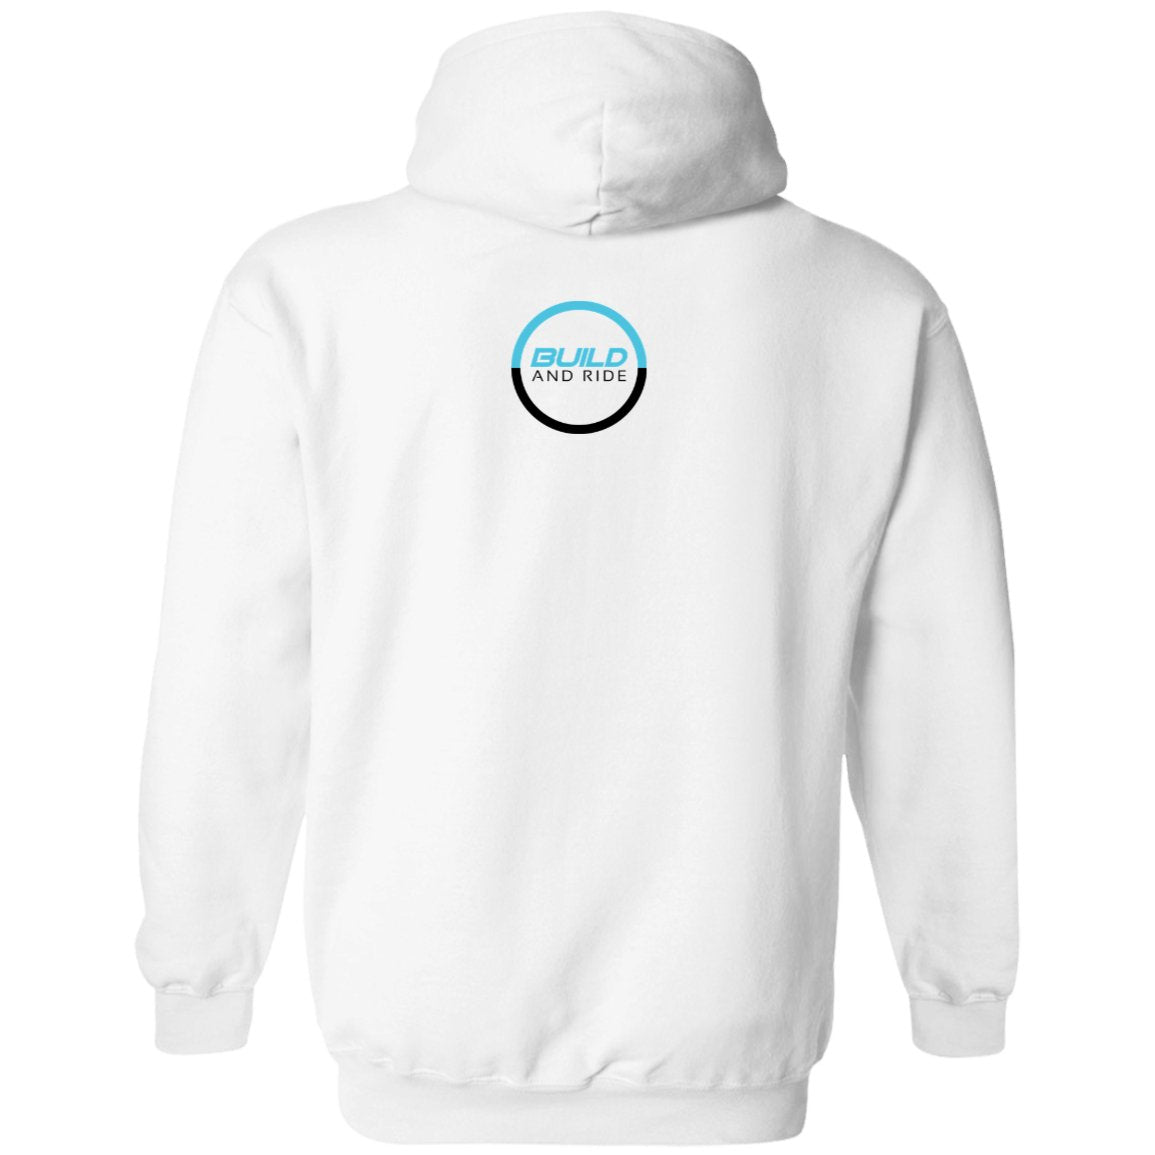 Build And Ride Hoodie - Build And Ride